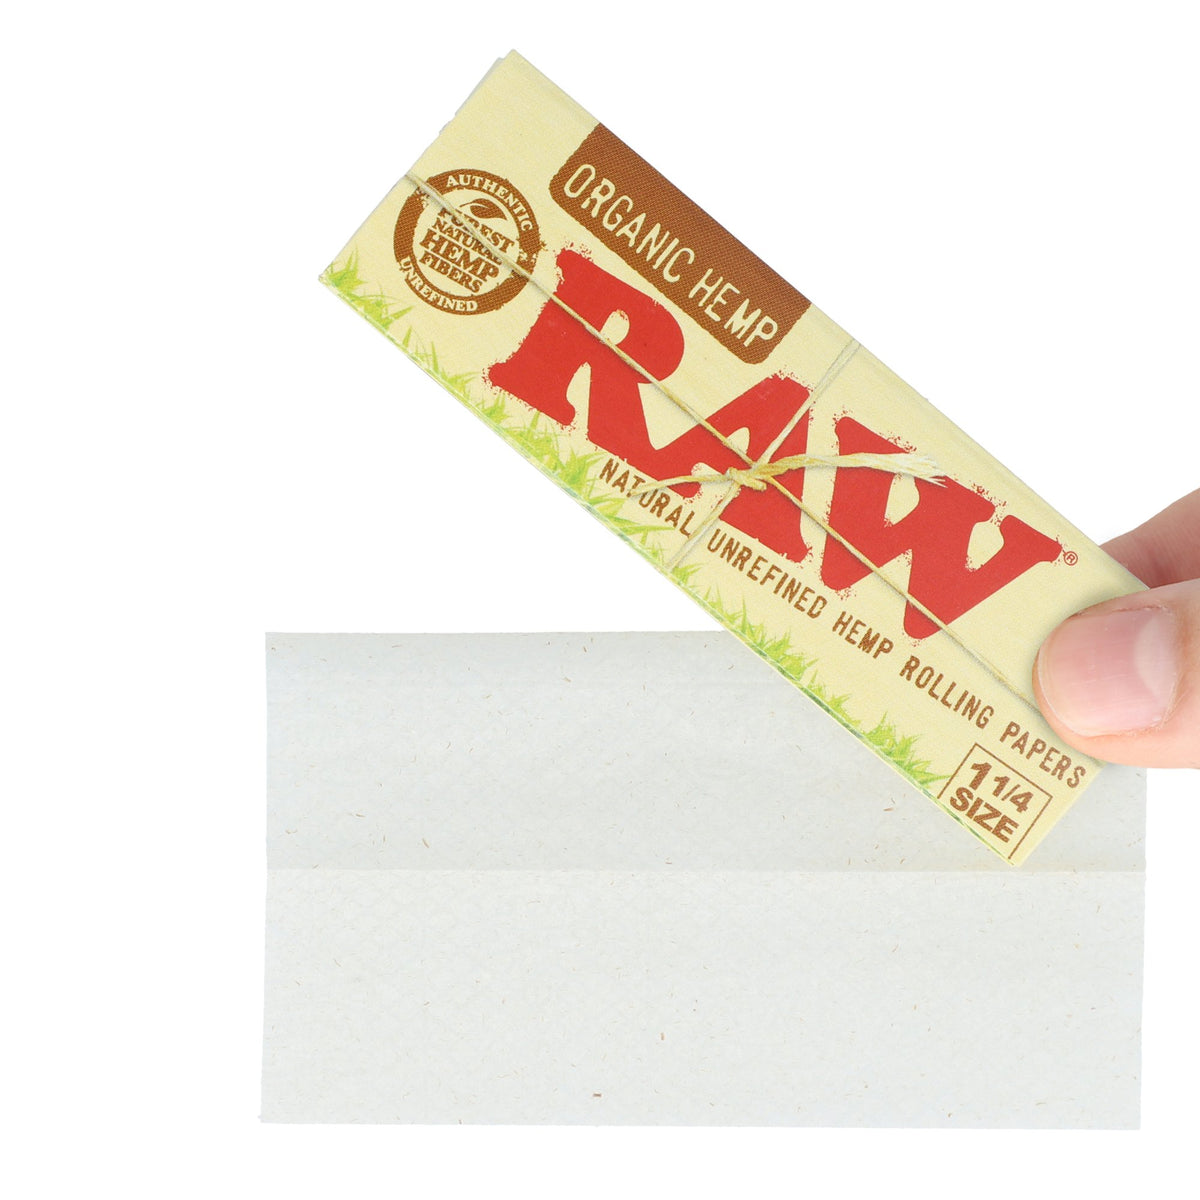 RAW Organic Hemp 1 1/4 Rolling Papers Rolling Papers esd-official